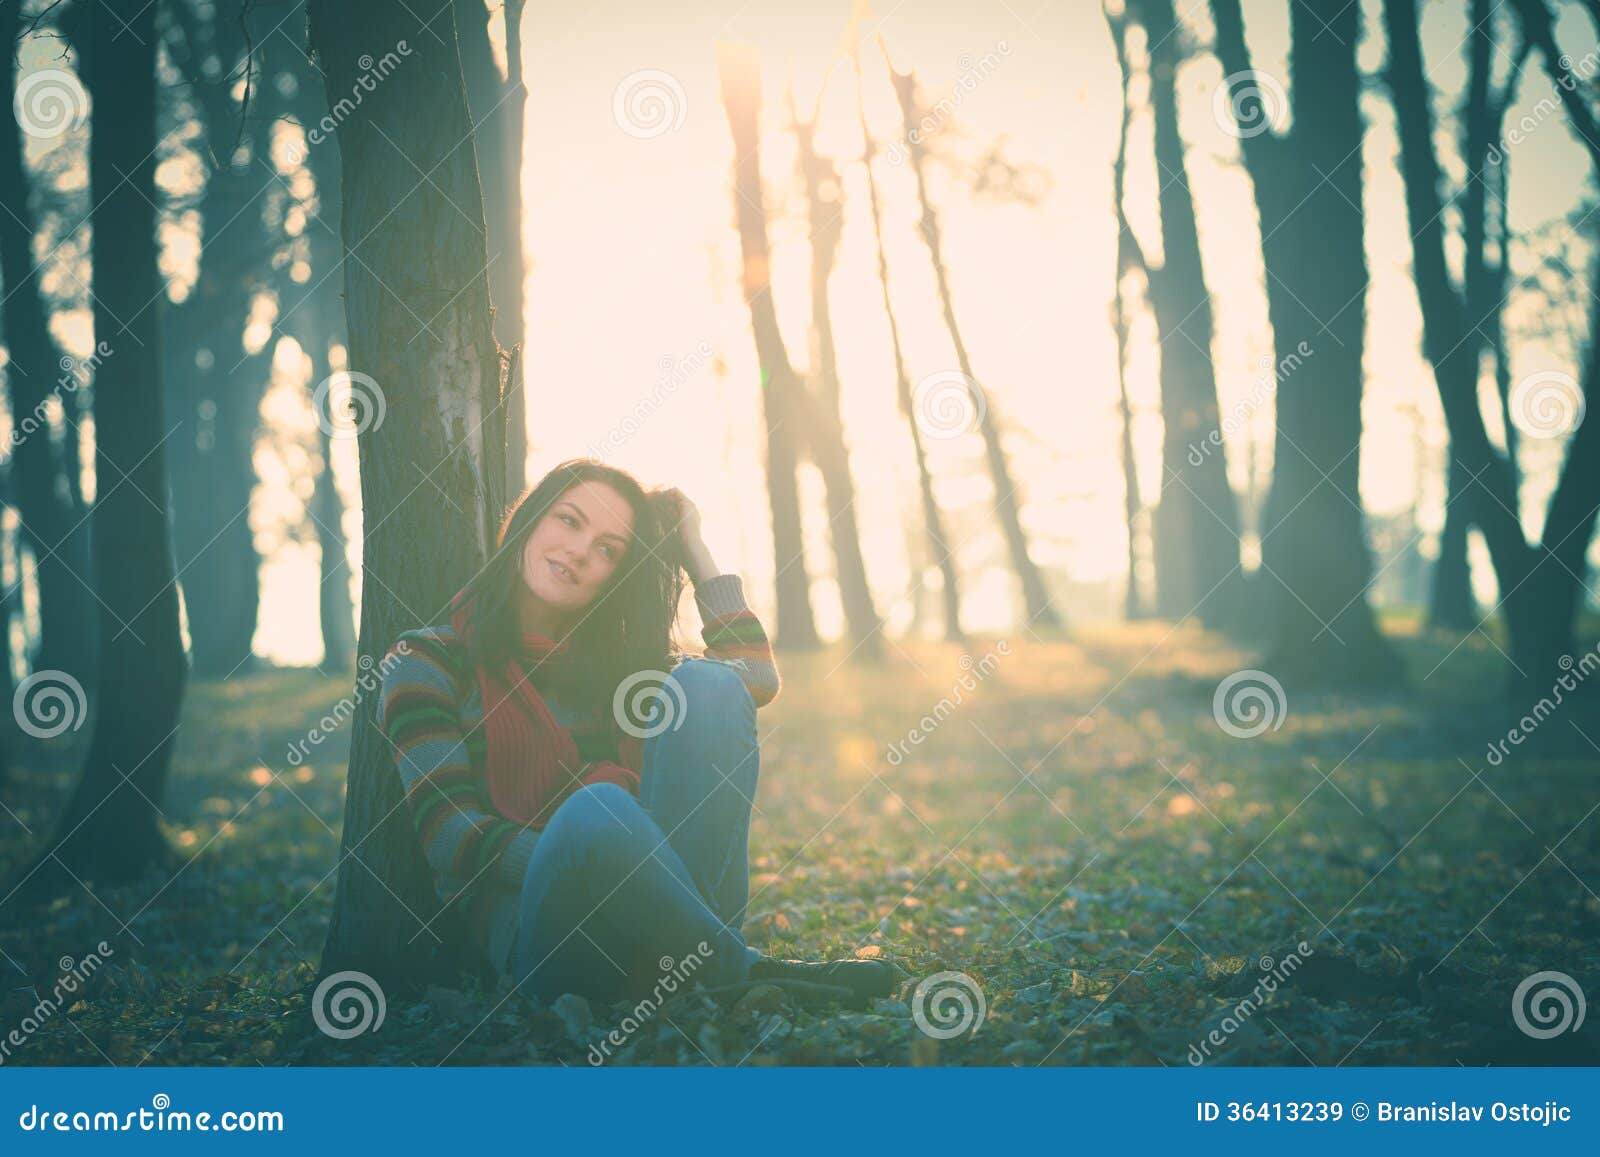 Rest in forest. Young woman in casual clothes rest by tree in forest retro colors